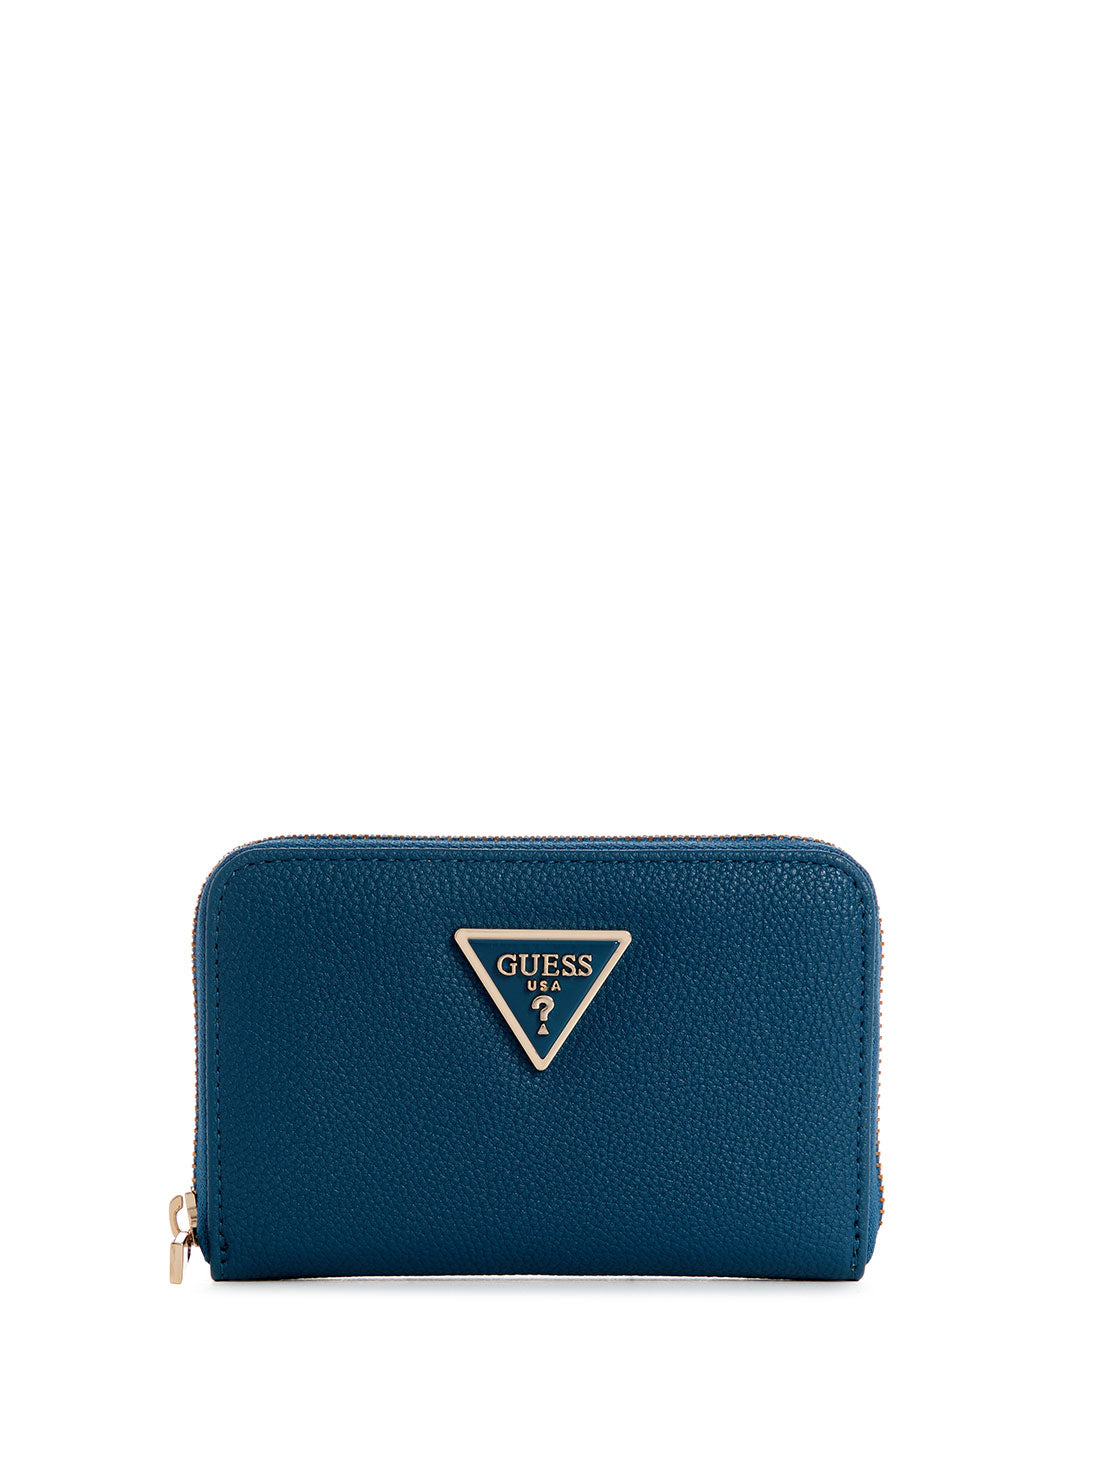 GUESS Blue Meridian Medium Wallet front view